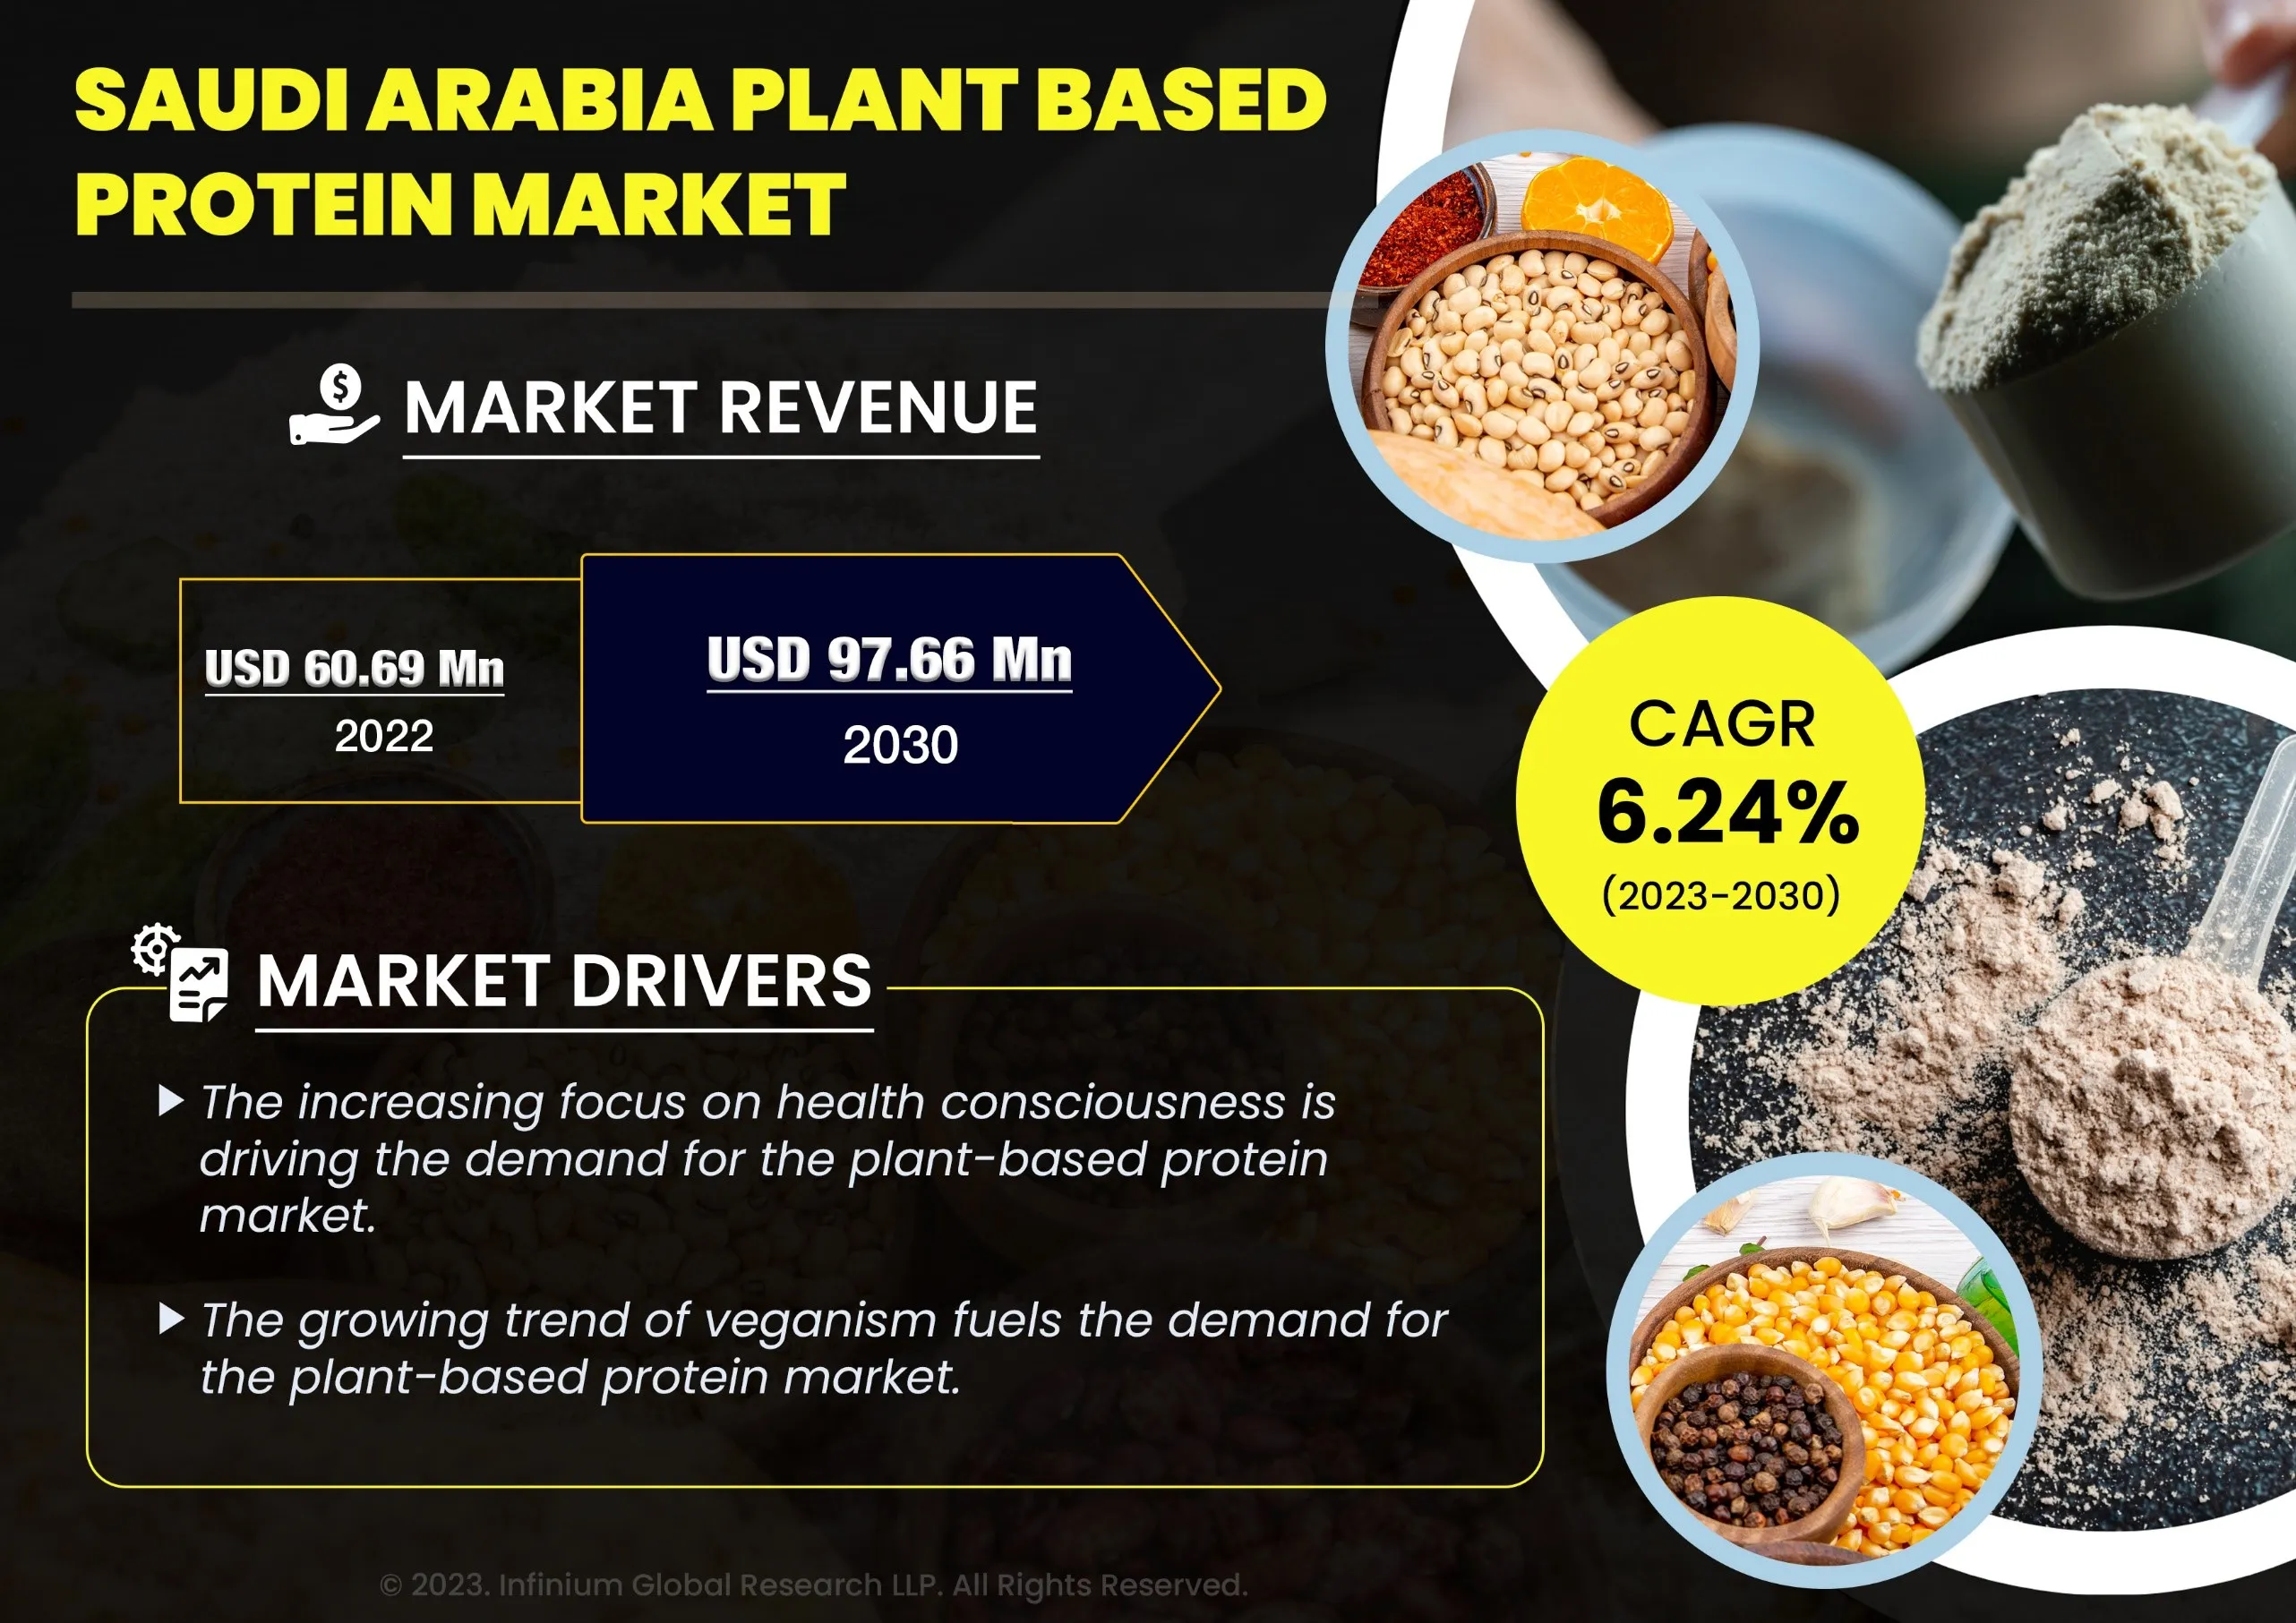 Saudi Arabia Plant Based Protein Market was Valued at USD 60.69 Million in 2022 and is Expected to Reach USD 97.66 Million by 2030 and Grow at a CAGR of 6.24% Over the Forecast Period.